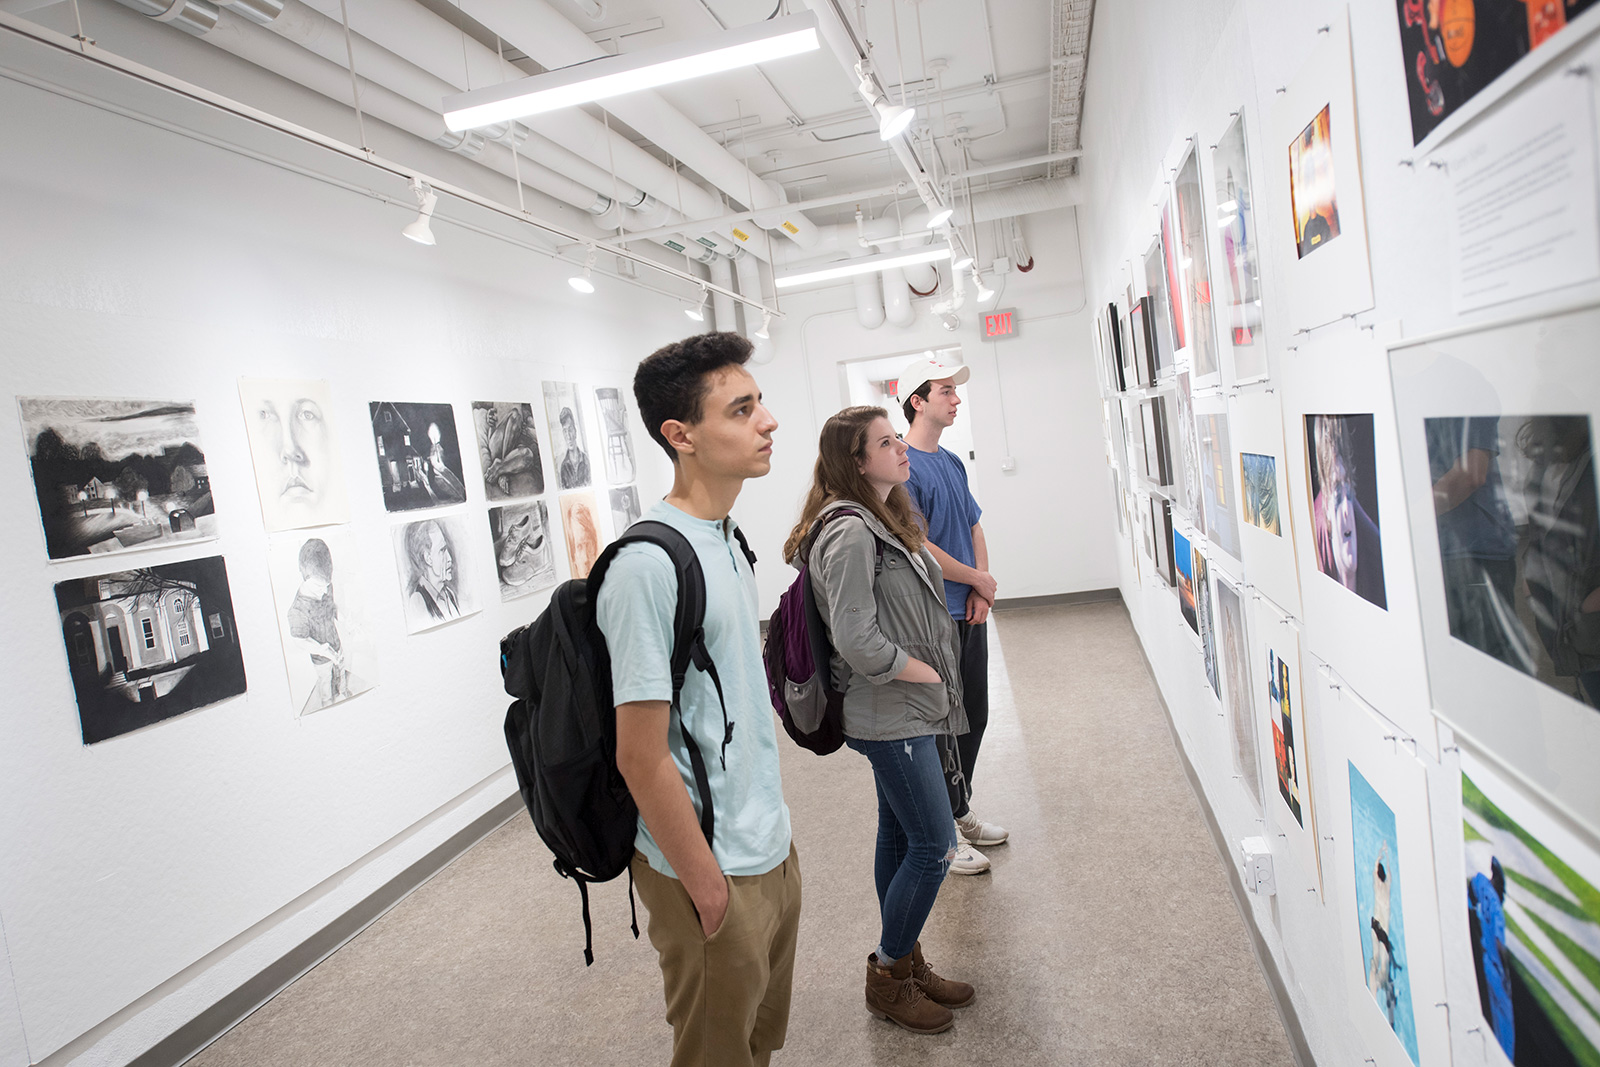 Students looking at art on display at the Feigenbaum Center for Visual Arts.